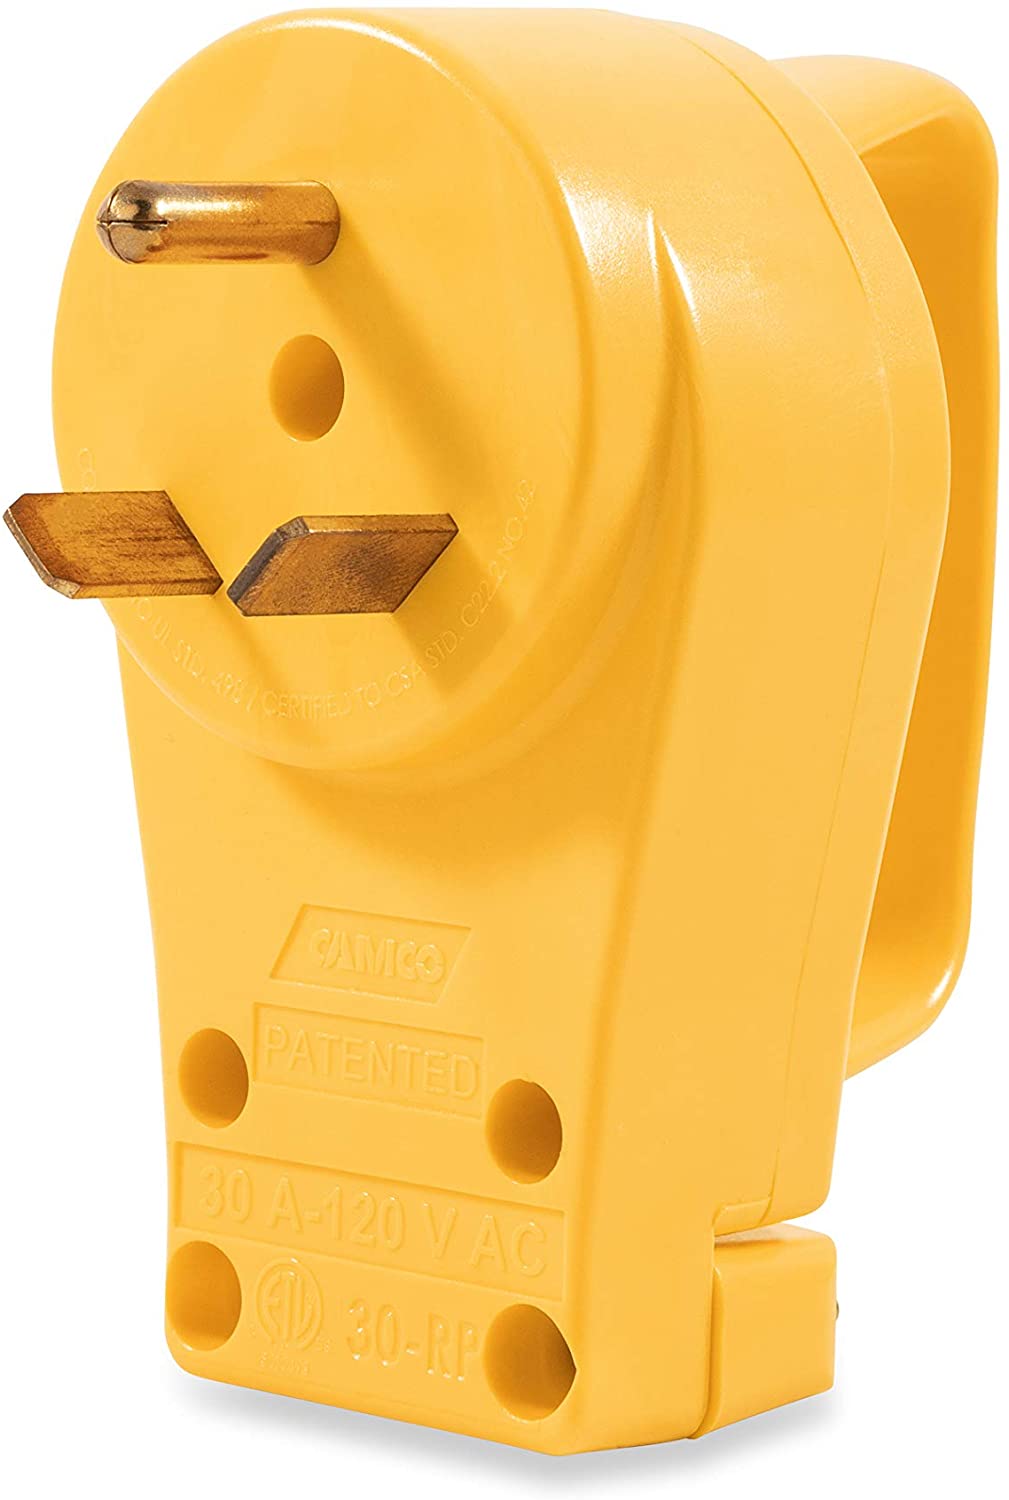 Camco Heavy Duty RV 30 AMP PowerGrip Male Replacement Plug- Durable and Safer Plug with an Easier Grip (55245)